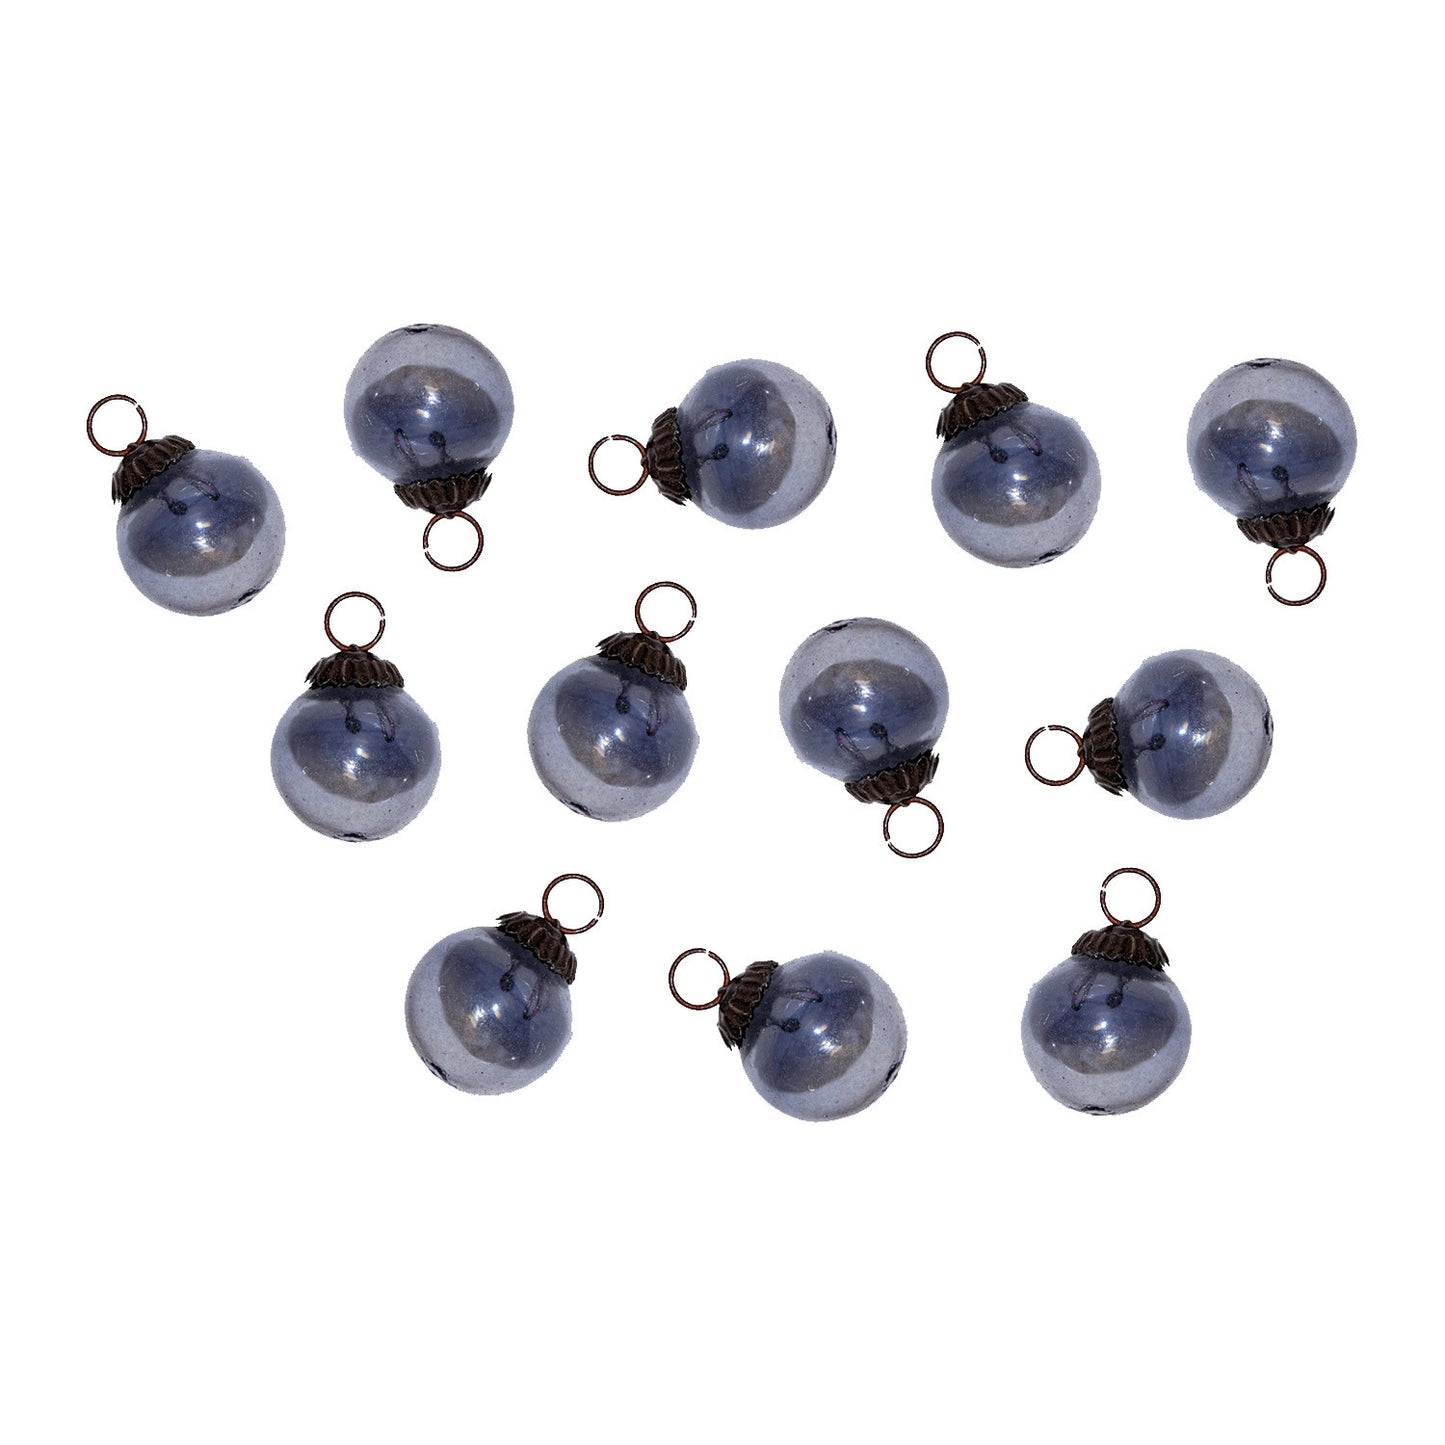 GiftBay 029(S/12) Antique-look Glass Ornament Set of 12 for Christmas Tree Decorations.